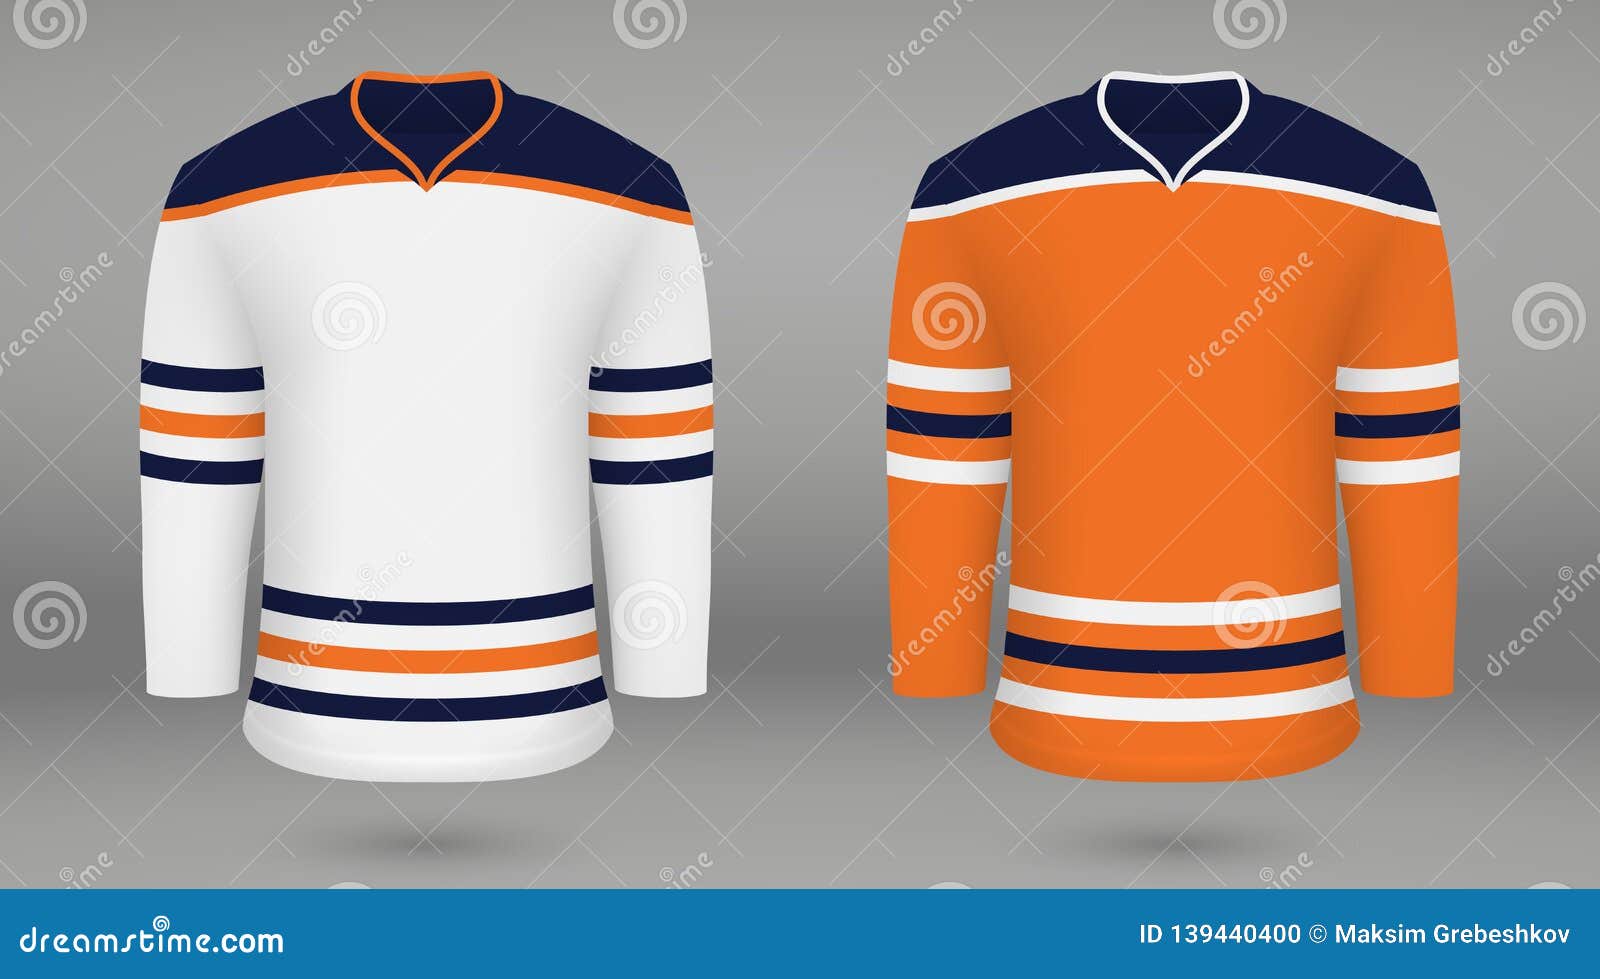 Get Our New Hockey Jersey Template!